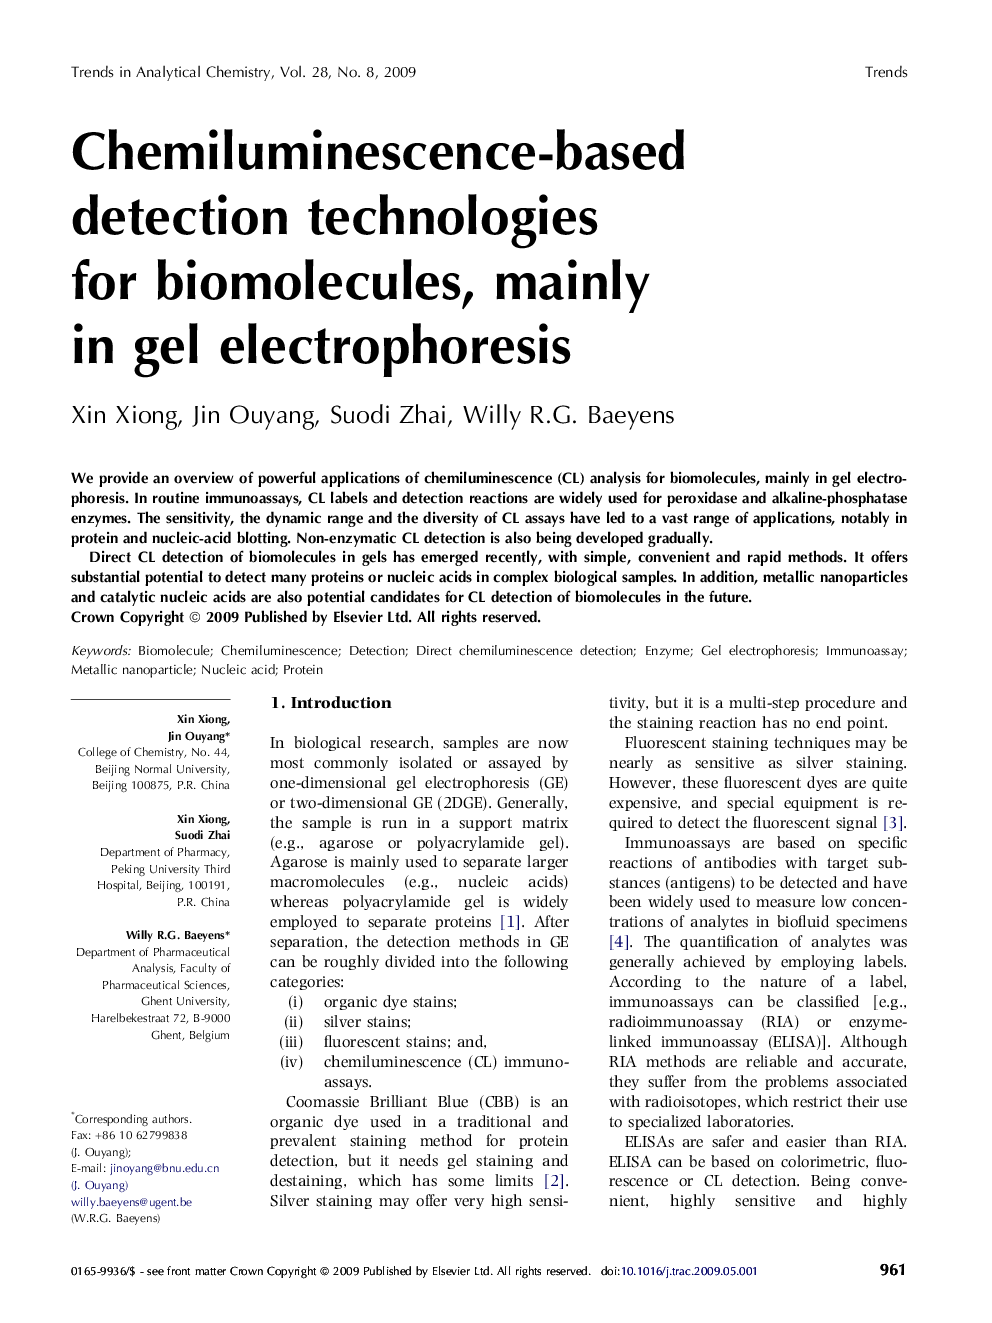 Chemiluminescence-based detection technologies for biomolecules, mainly in gel electrophoresis